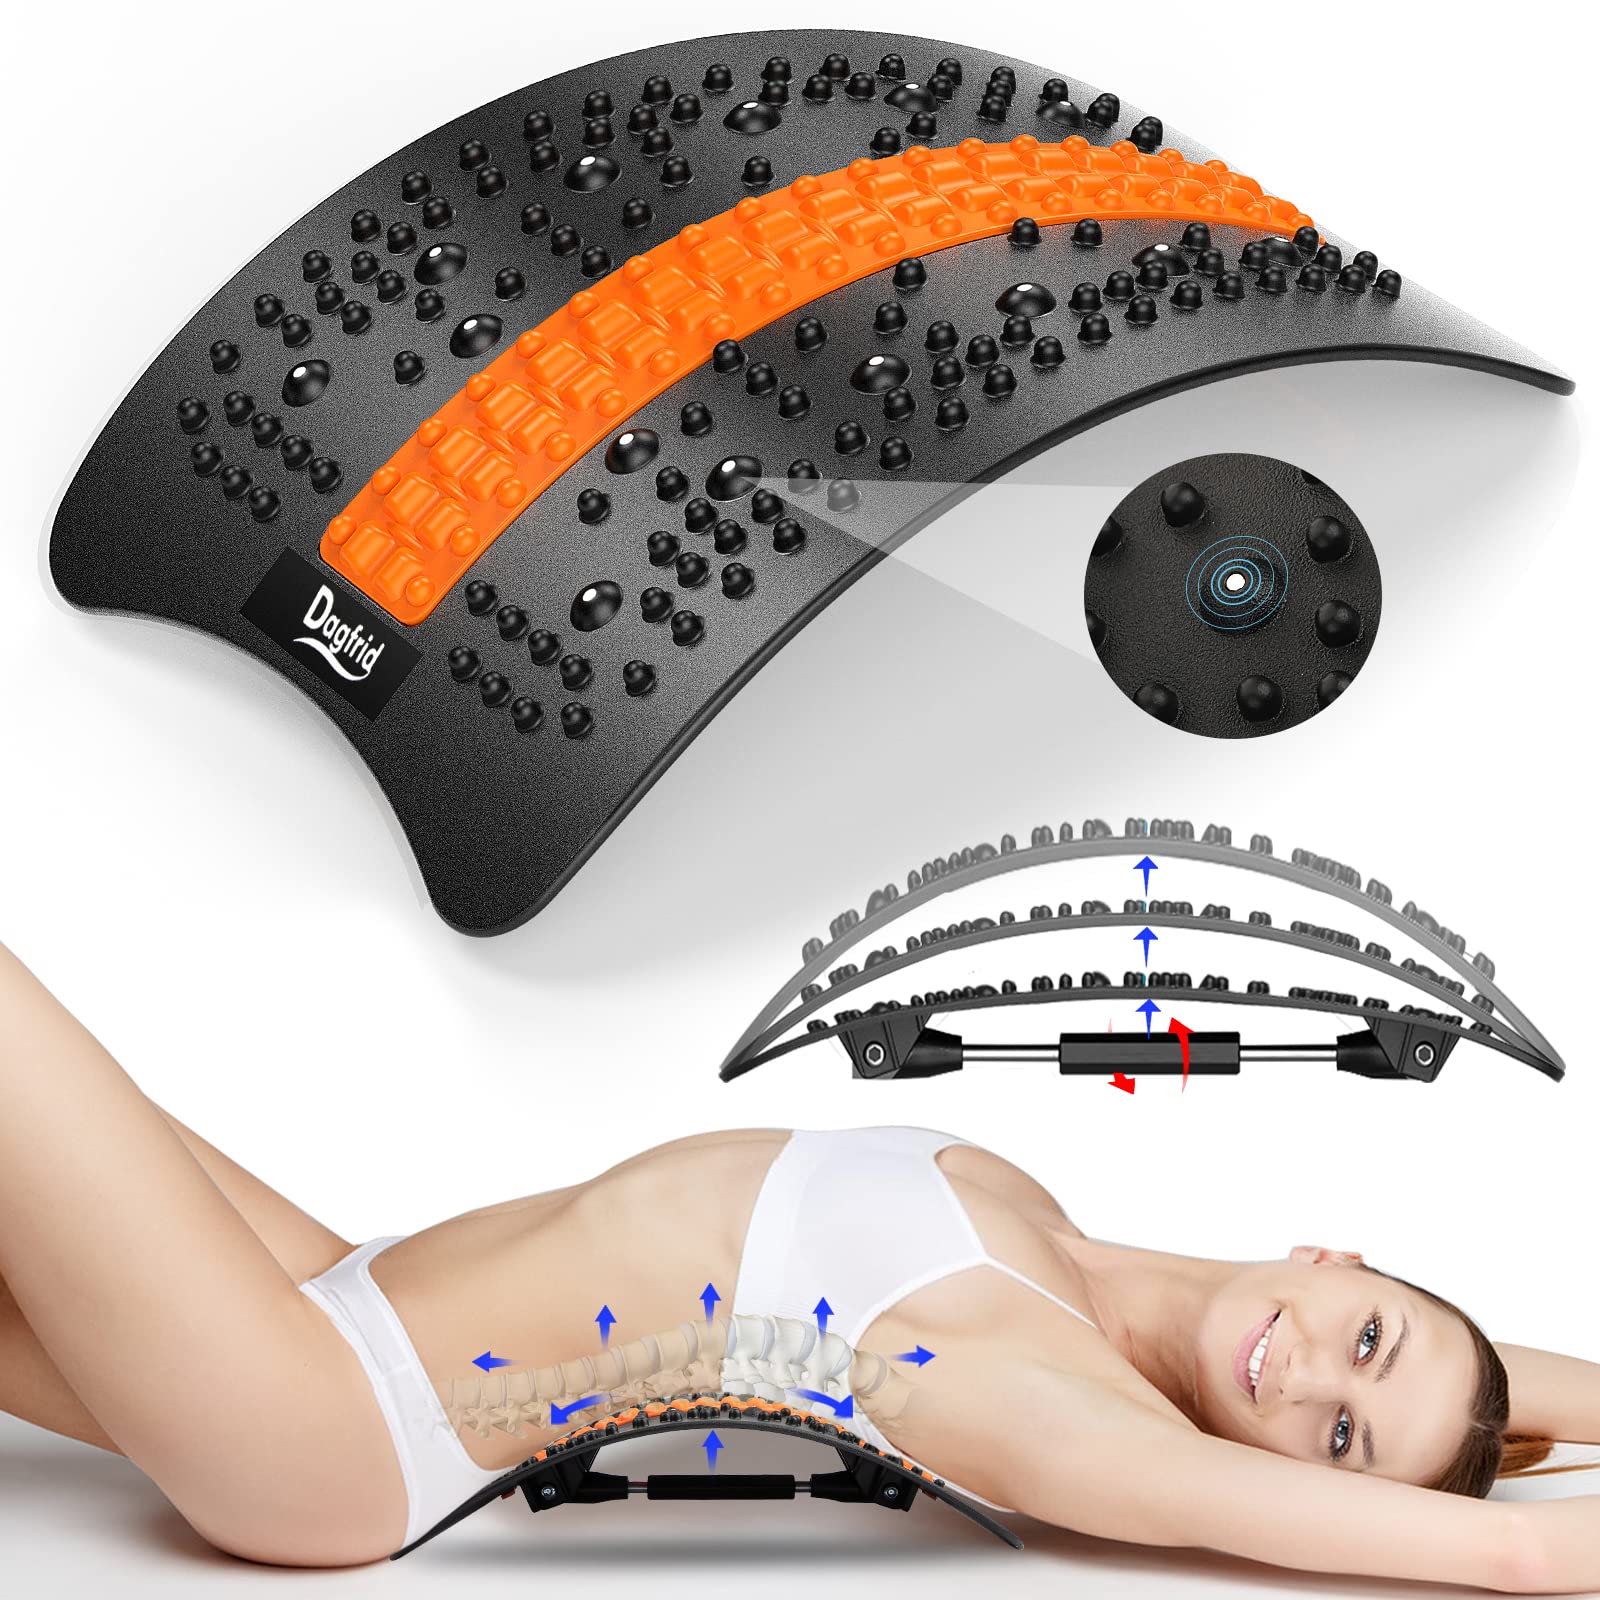 Back Stretcher For Lower Back Pain Relief,back Cracker Board With 3  Adjustable Settings,back Cracking Device For Spinal Pain Relieve,herniated  Dis